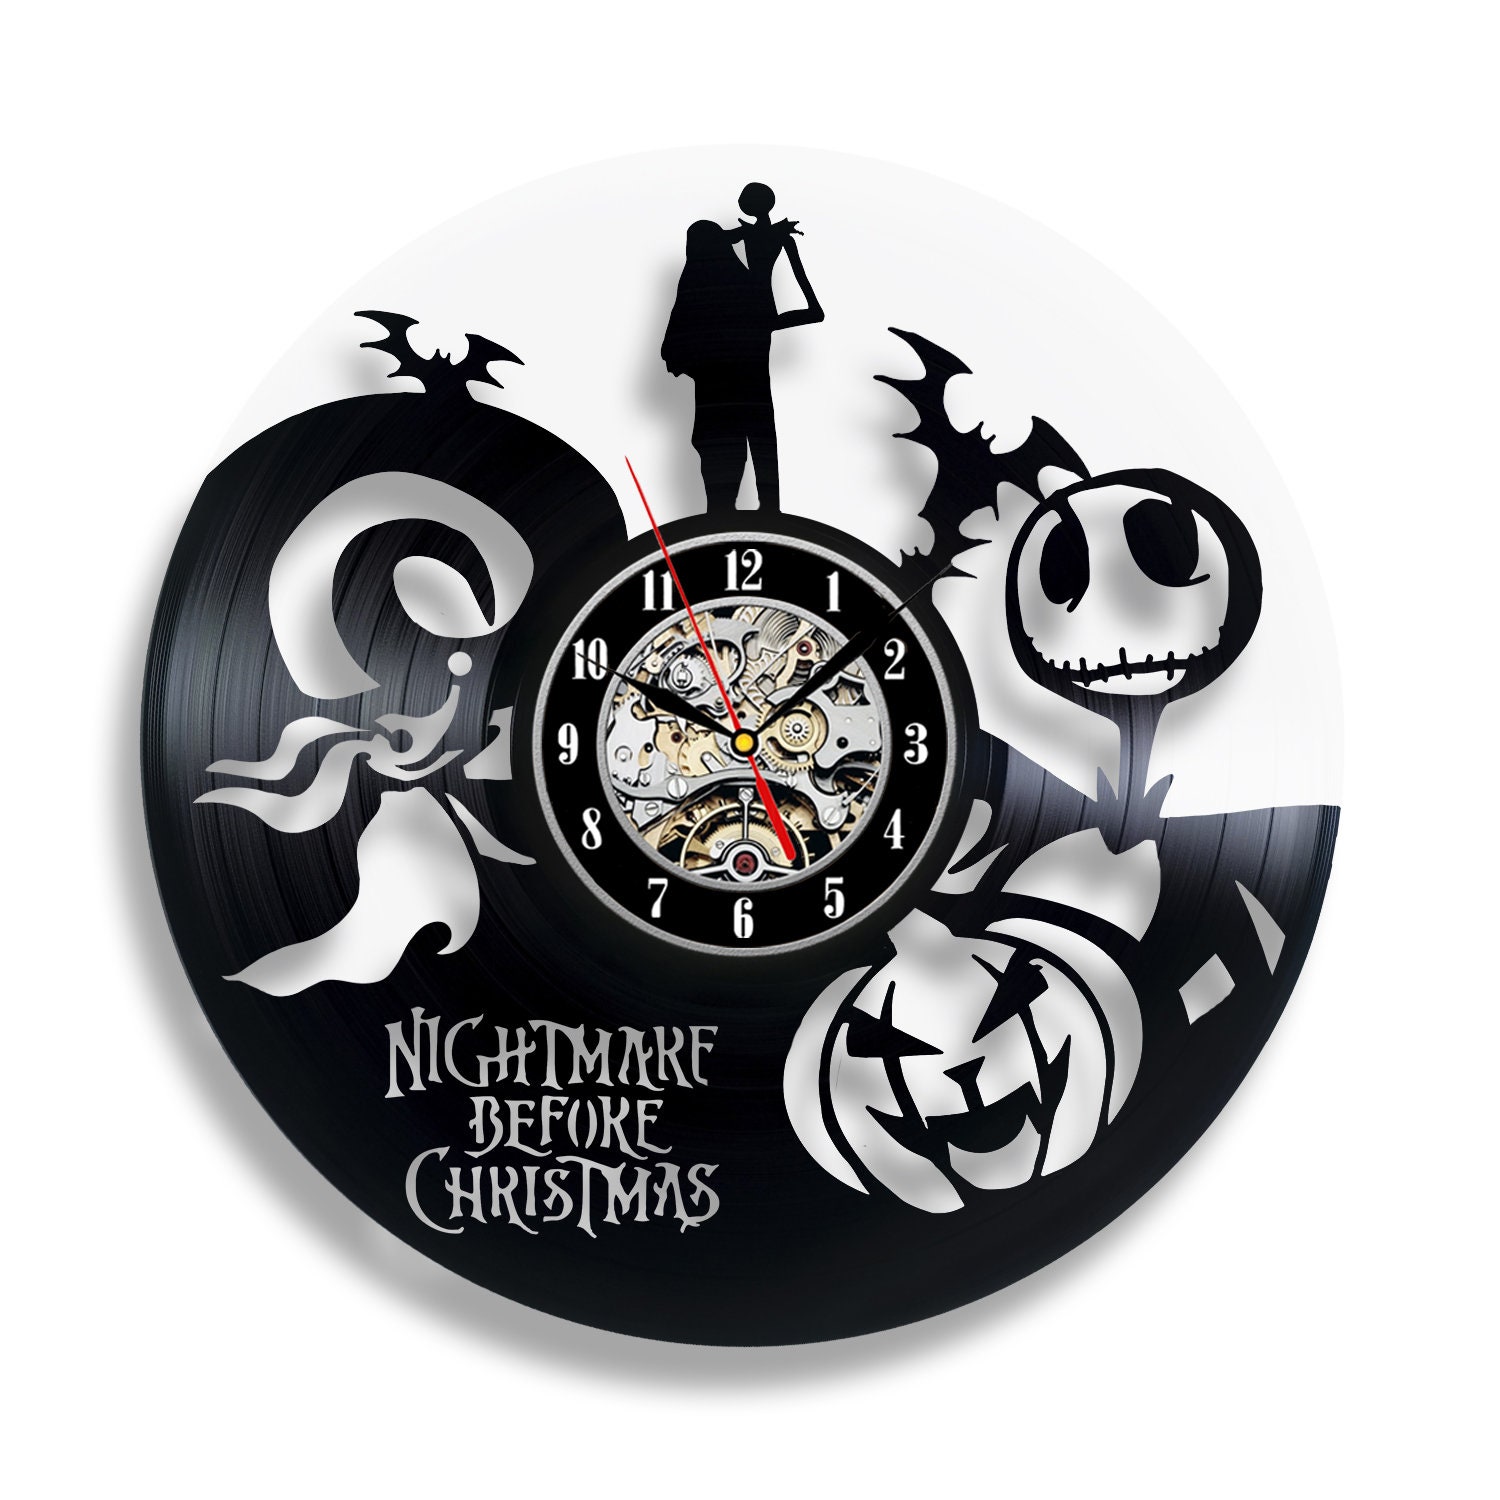 Nightmare Before Christmas 5D Diamond Painting Clock Kit Square Drill Home  Decor Handcraft, 11.375in X11.375in 